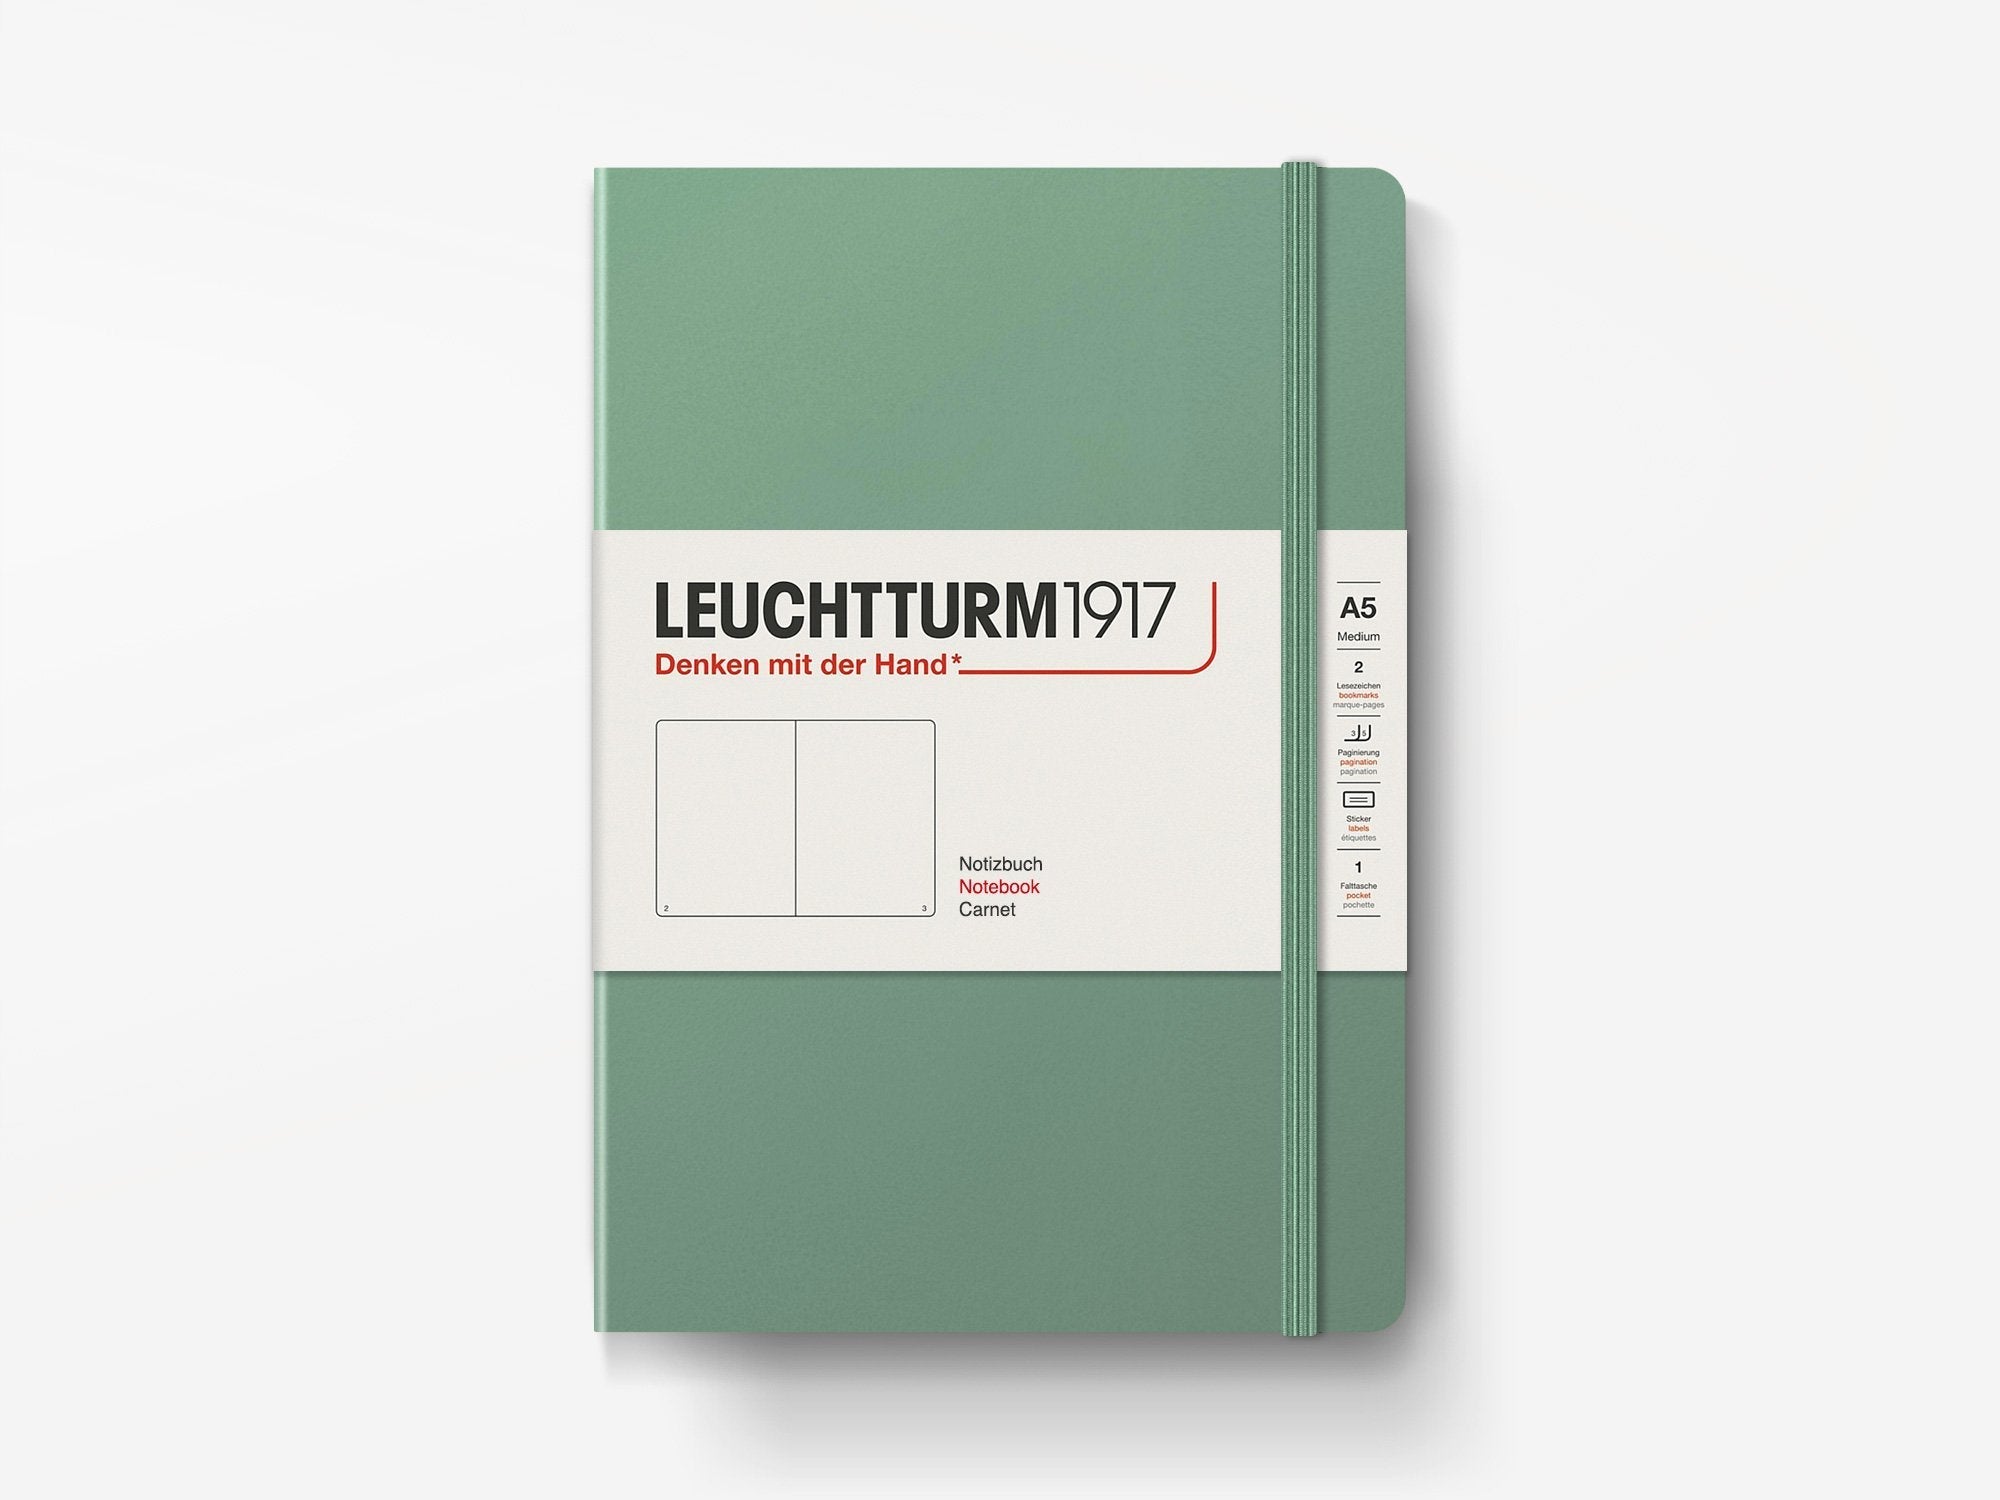  LEUCHTTURM1917 - Notebook Hardcover Medium A5-251 Numbered  Pages for Writing and Journaling (Berry, Dotted) : Office Products